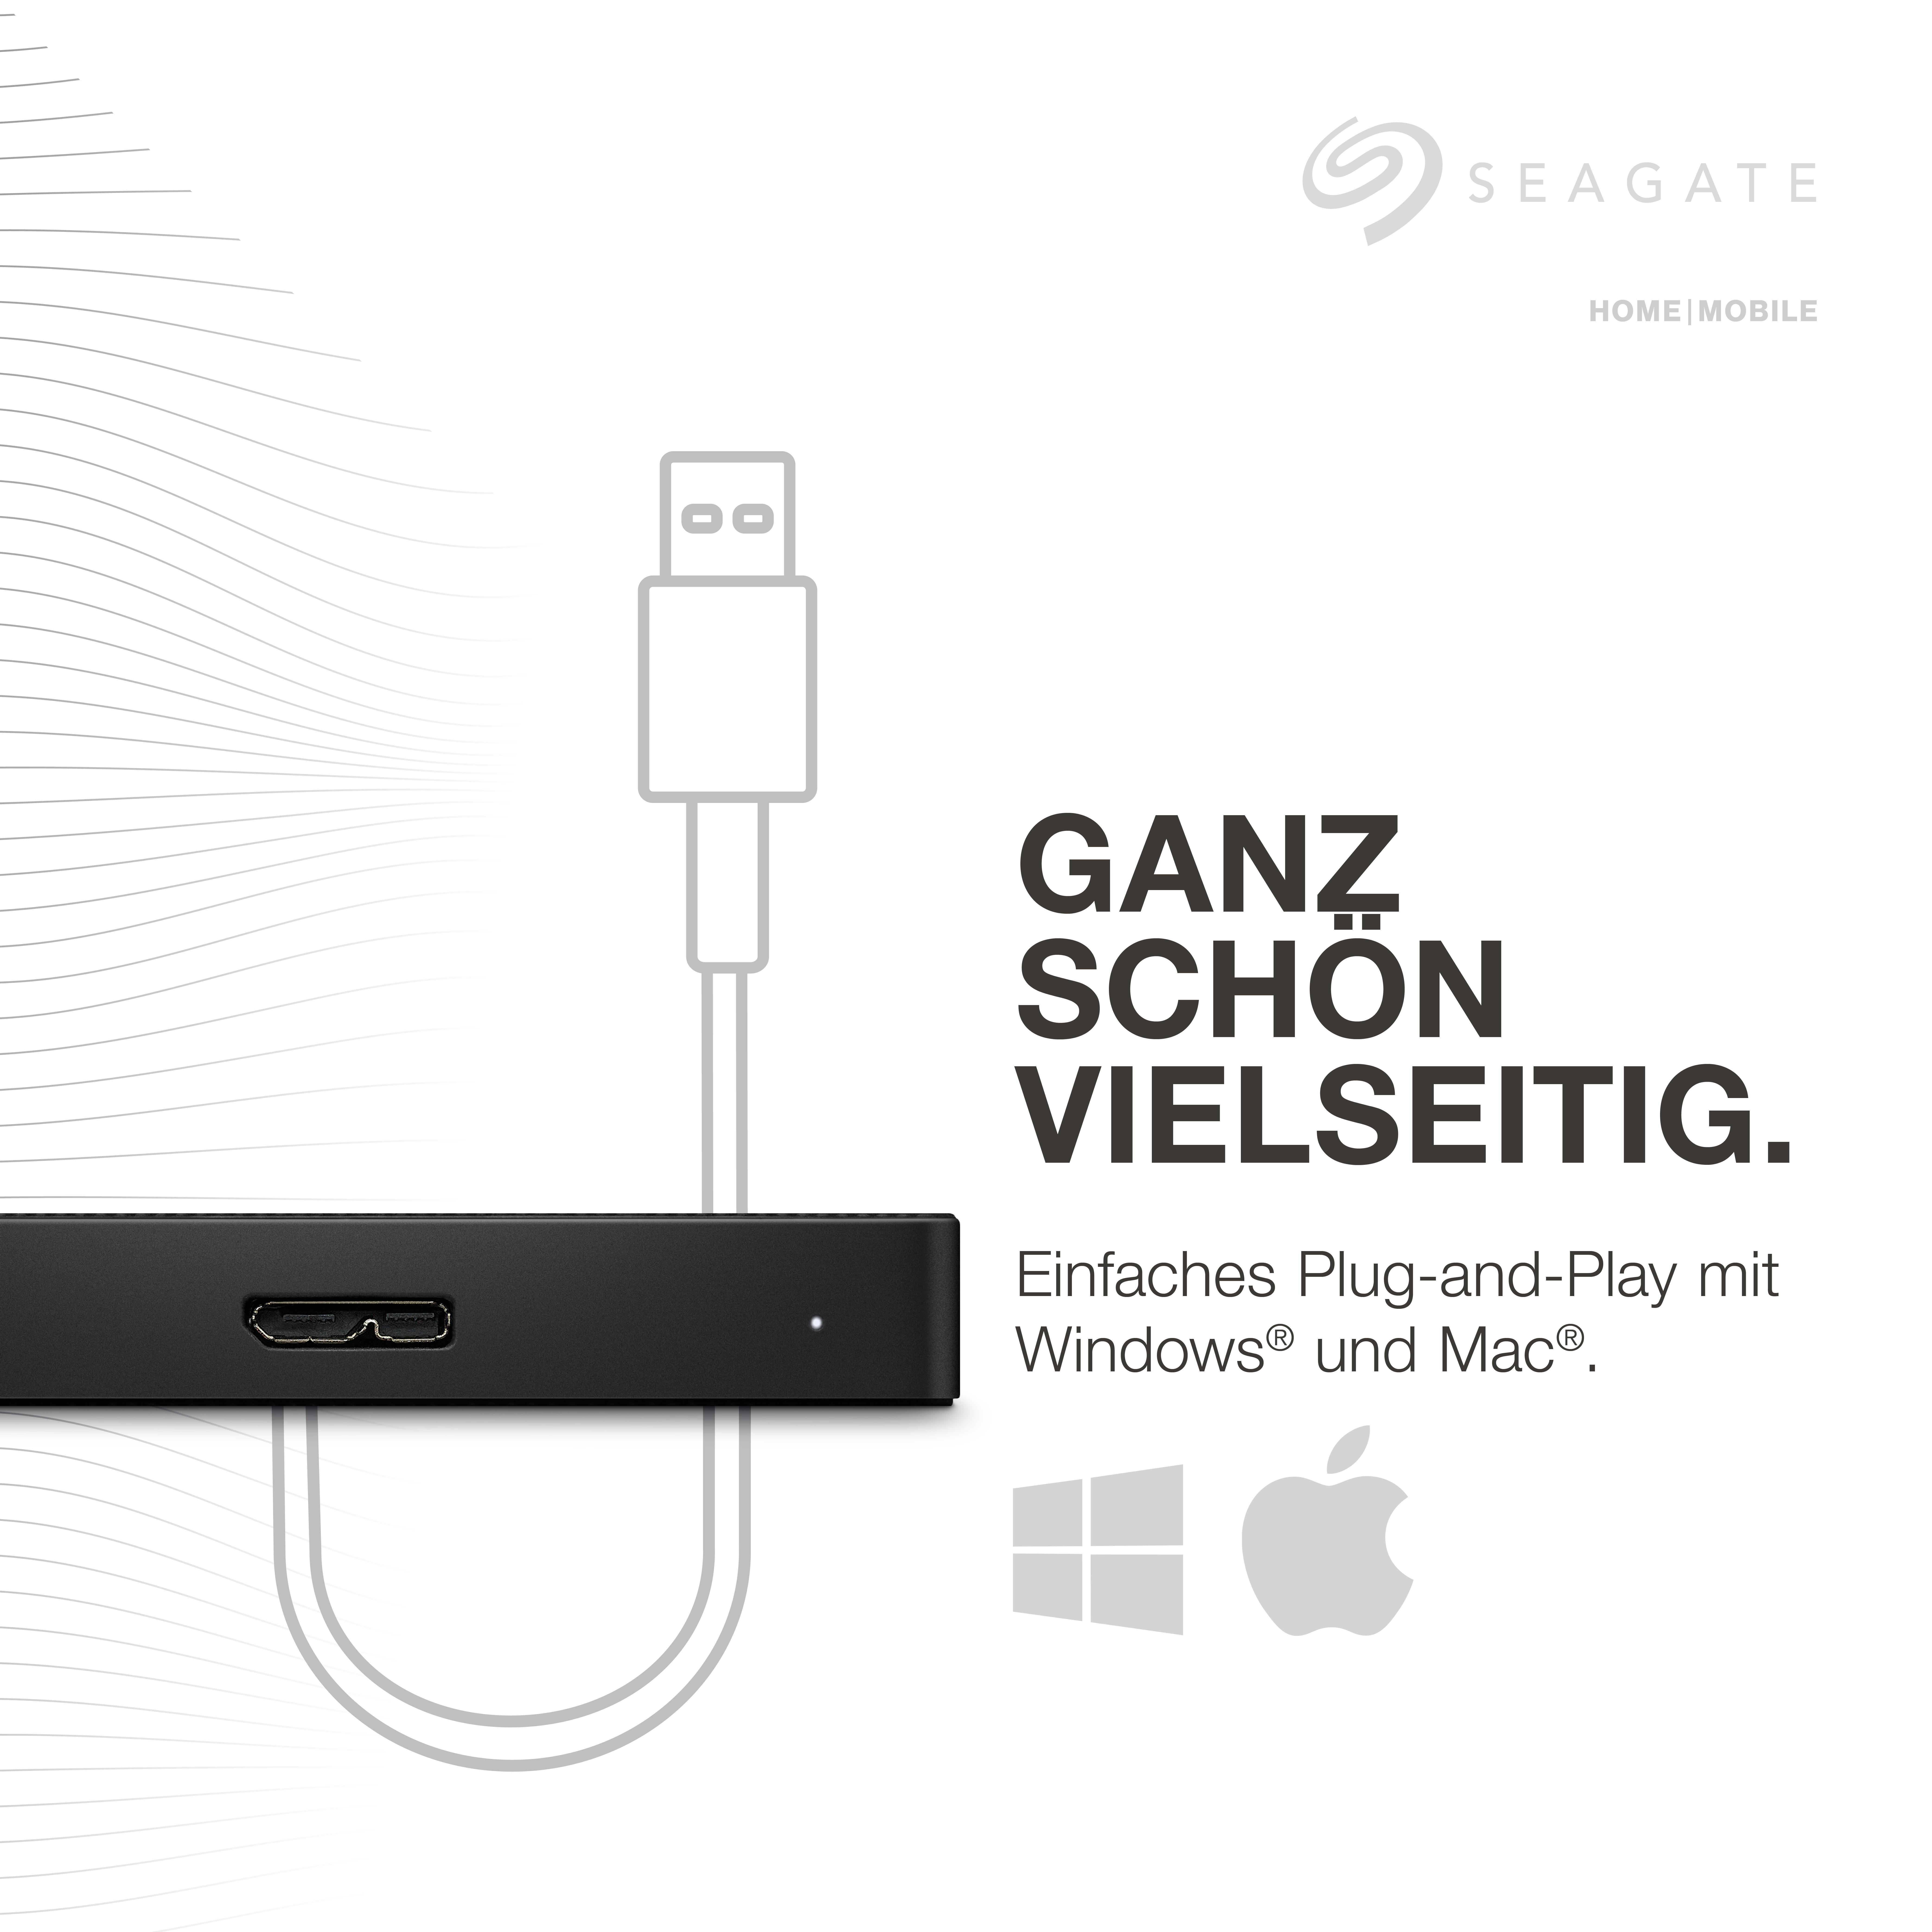 SEAGATE Expansion Portable, Exclusive 2,5 HDD, extern, TB Schwarz Zoll, Festplatte, Edition 1